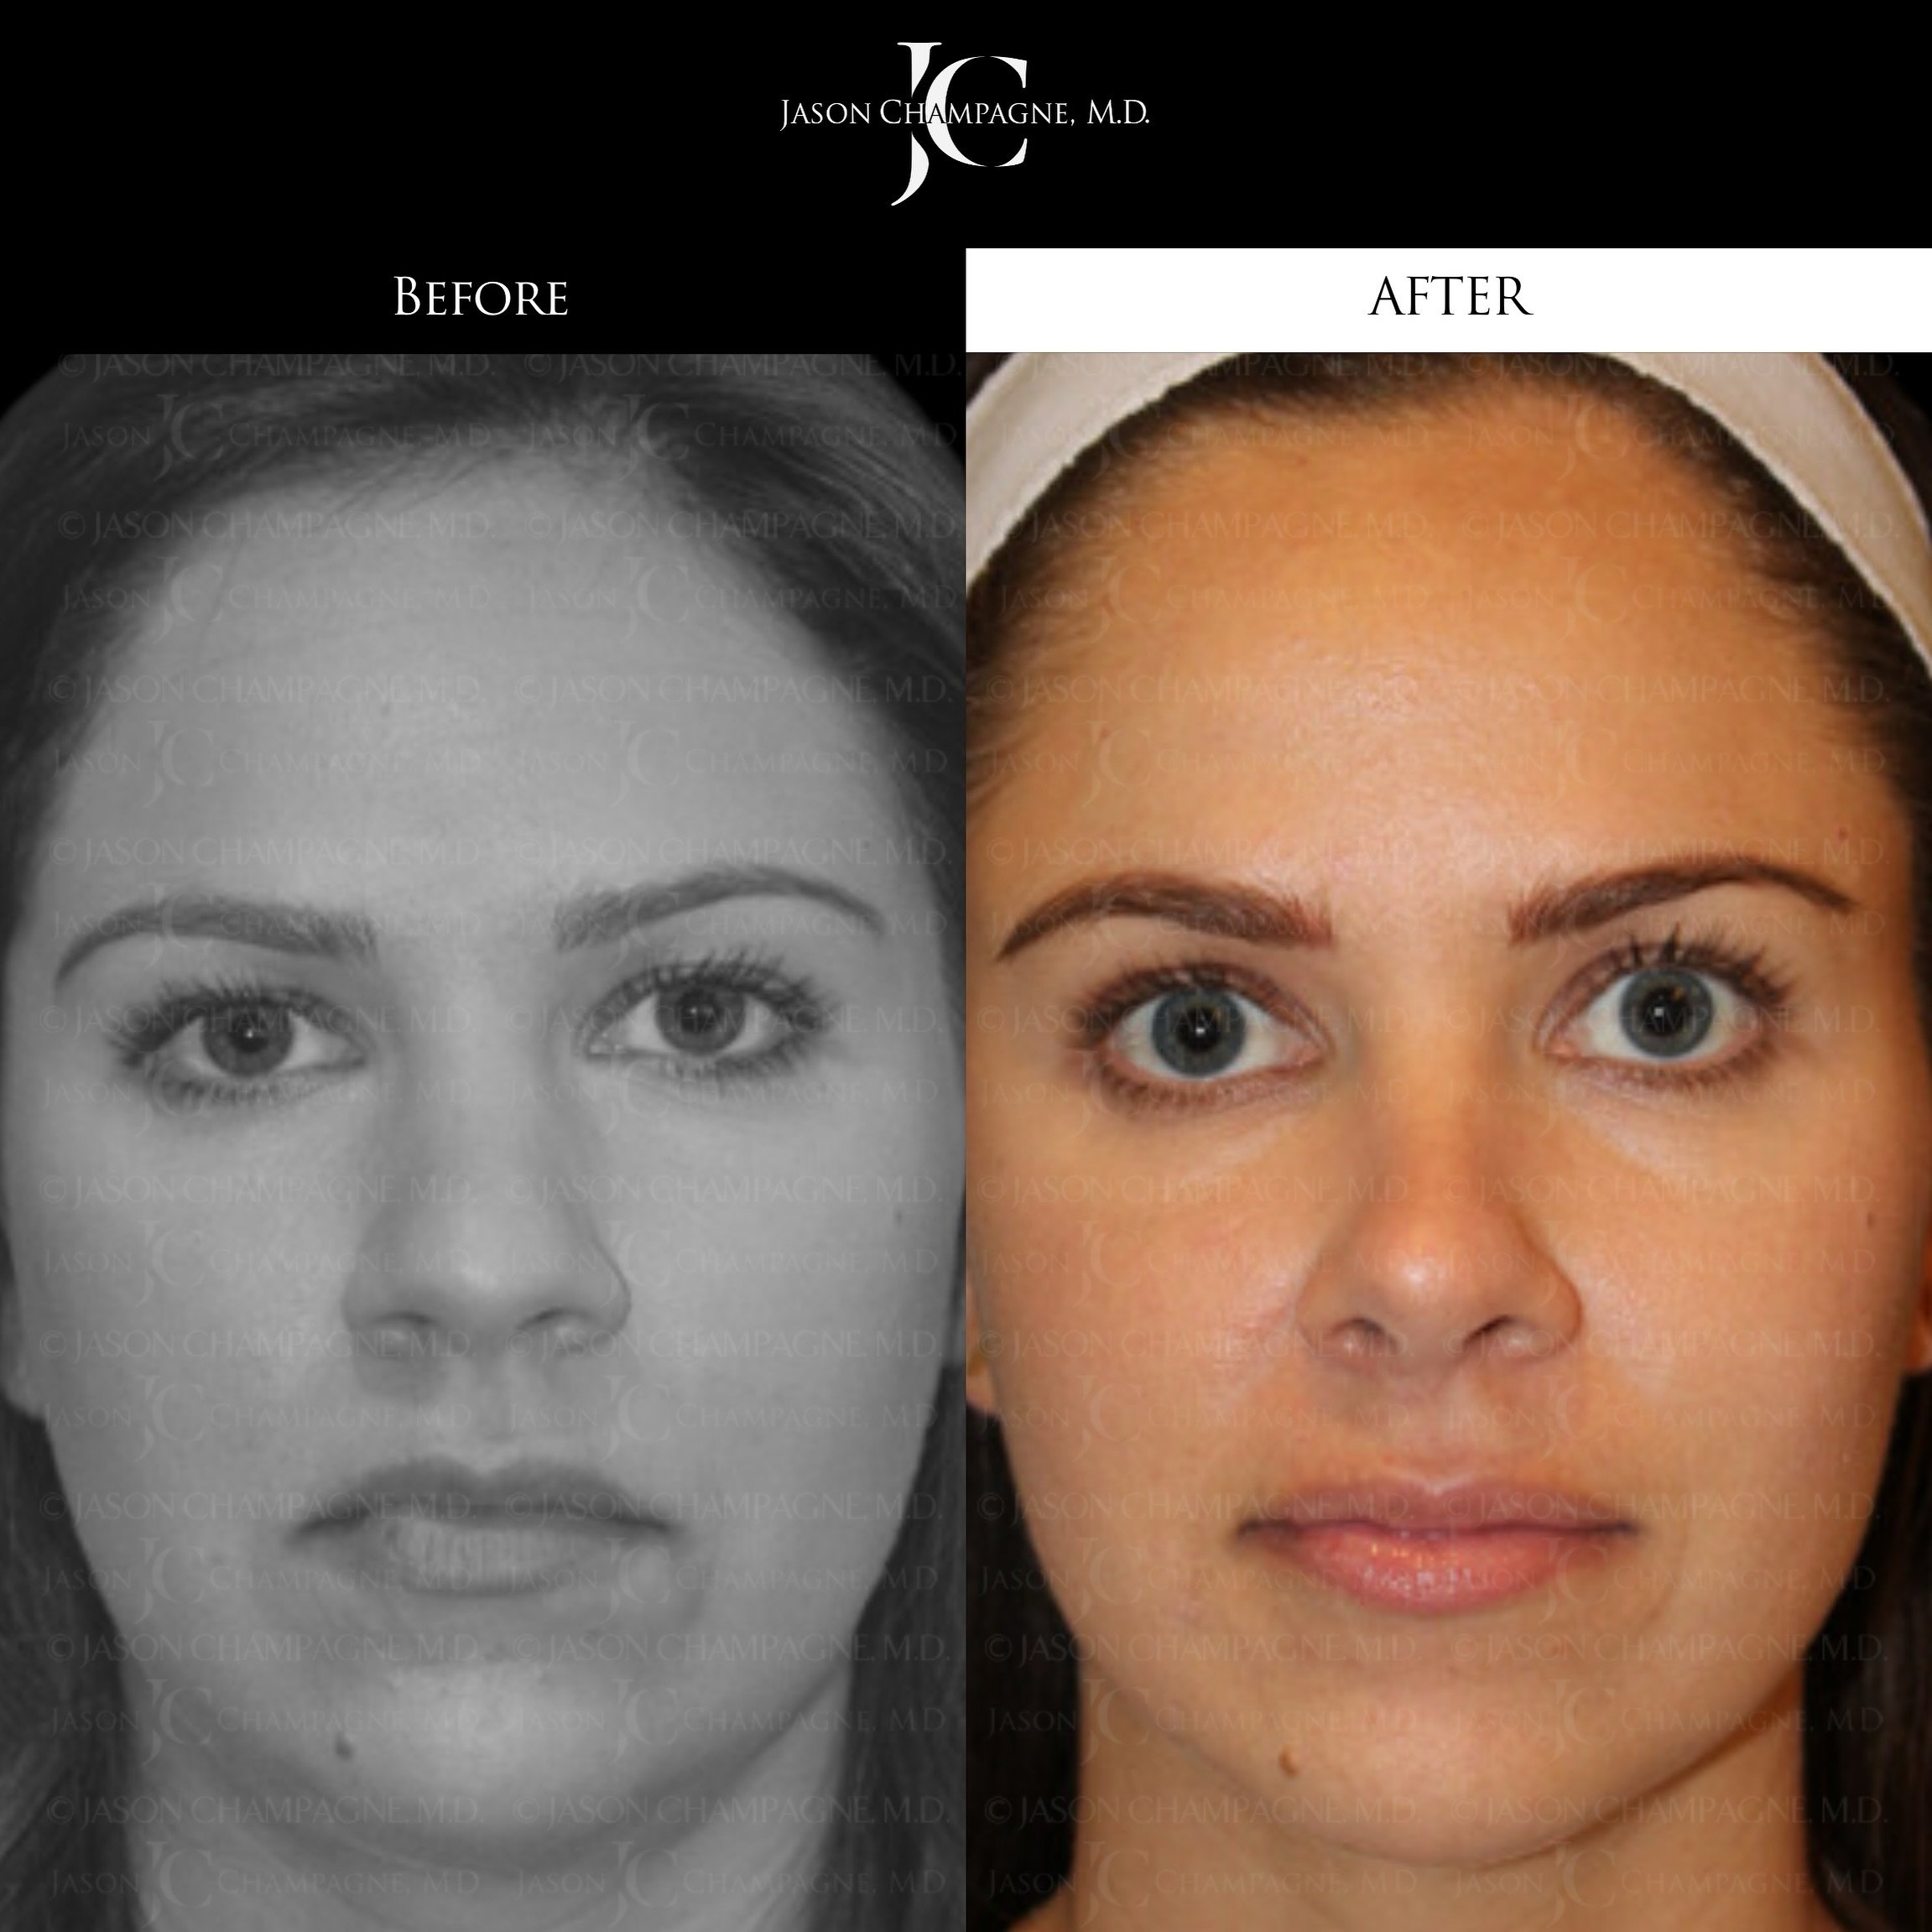 Here&rsquo;s a different patient of mine, who was unhappy with the width and the tip of her nose. Notice the refined shape and improved proportions. #DrChampagneBeforeAndAfters 
.
.
#rhinoplastybeforeandafter #beforeandafterrhinoplasty #beforeandafte